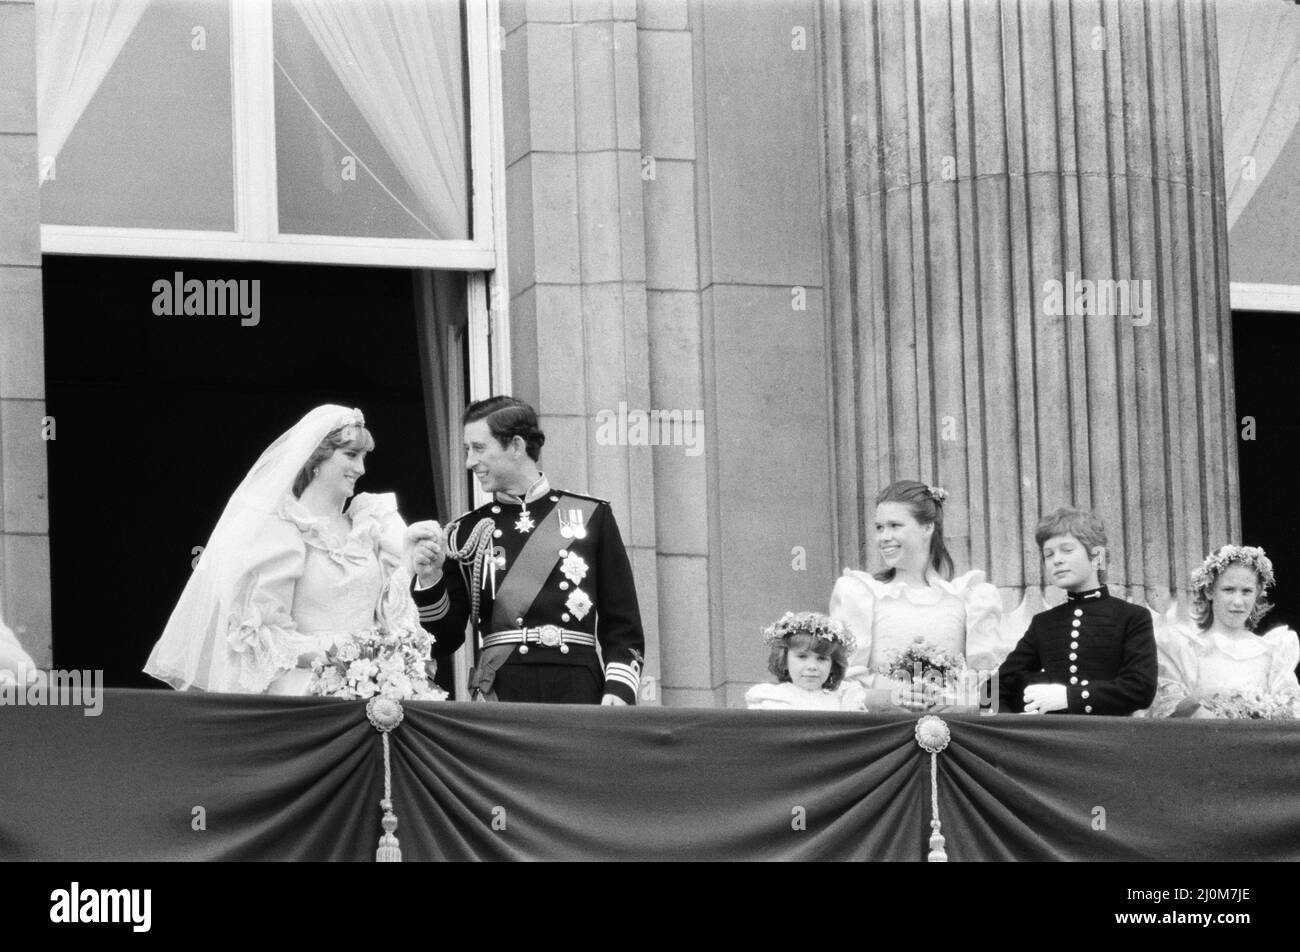 Prince Charles marries Lady Diana Spencer. Picture taken of the happy couple on the balcony at Buckingham Palace after the wedding ceremony.  Picture taken 29th July 1981. Stock Photo